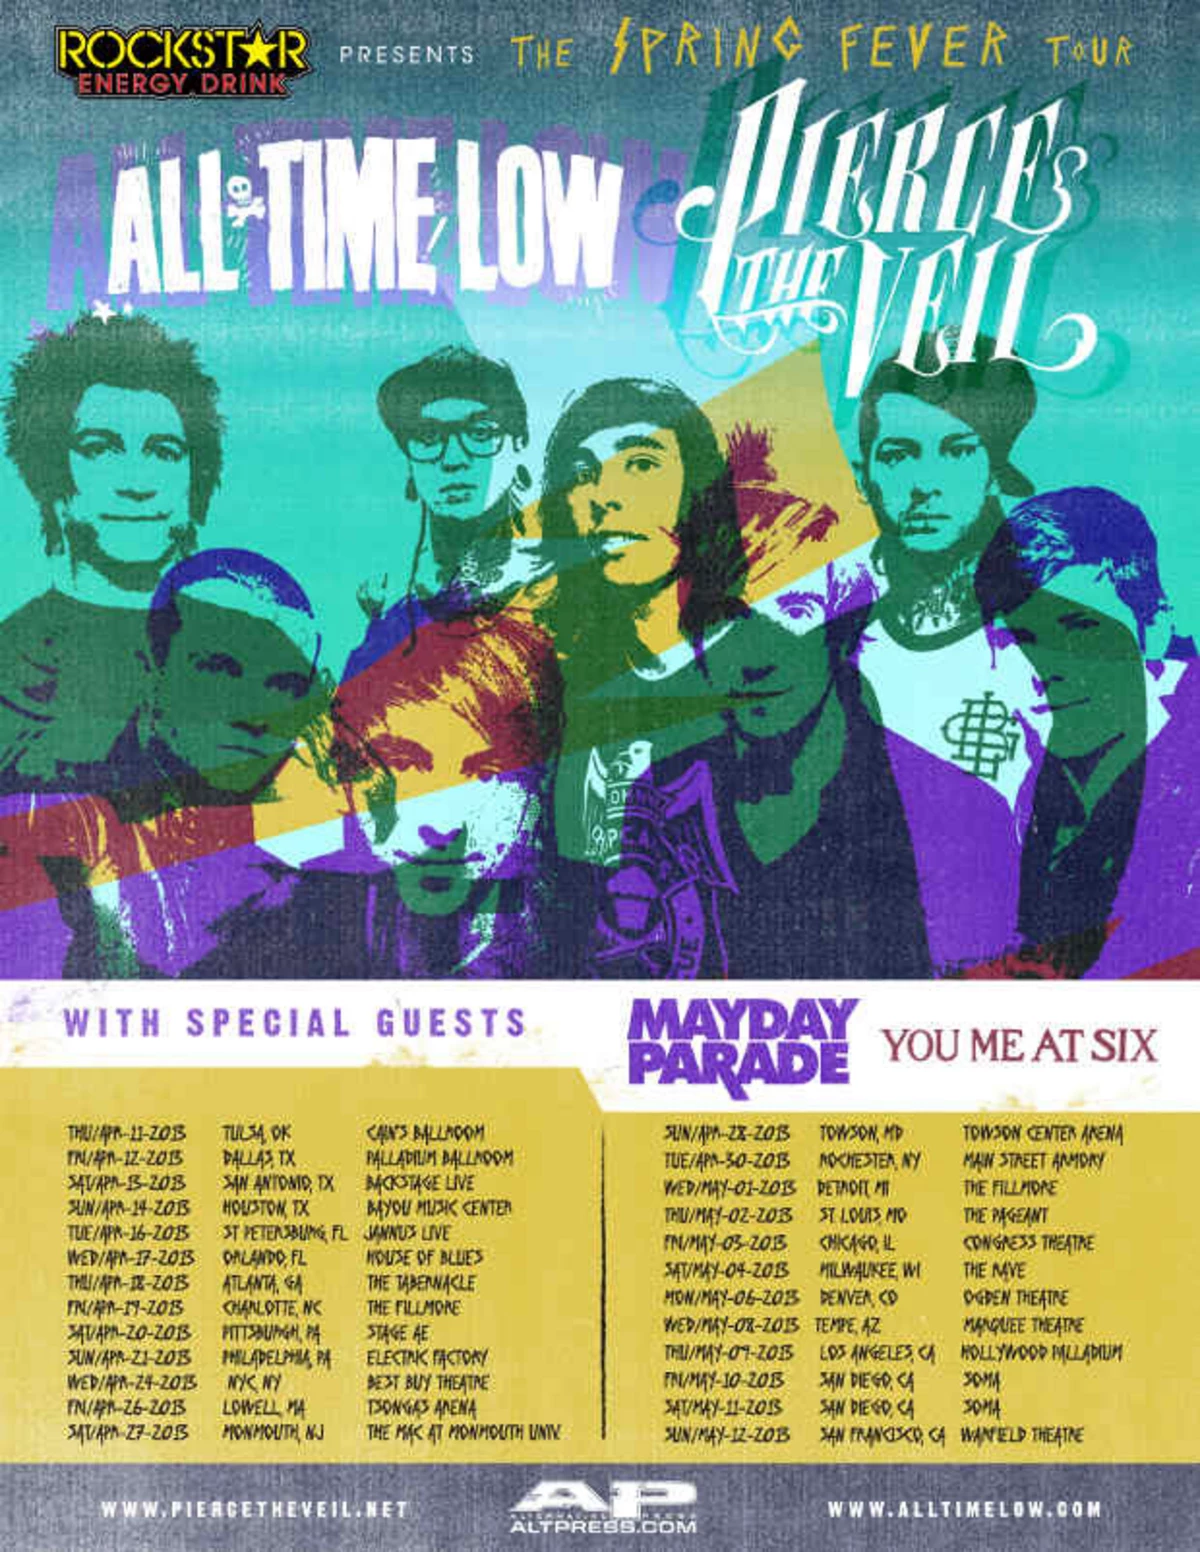 Pierce The Veil and All Time Low announce coheadlining tour dates